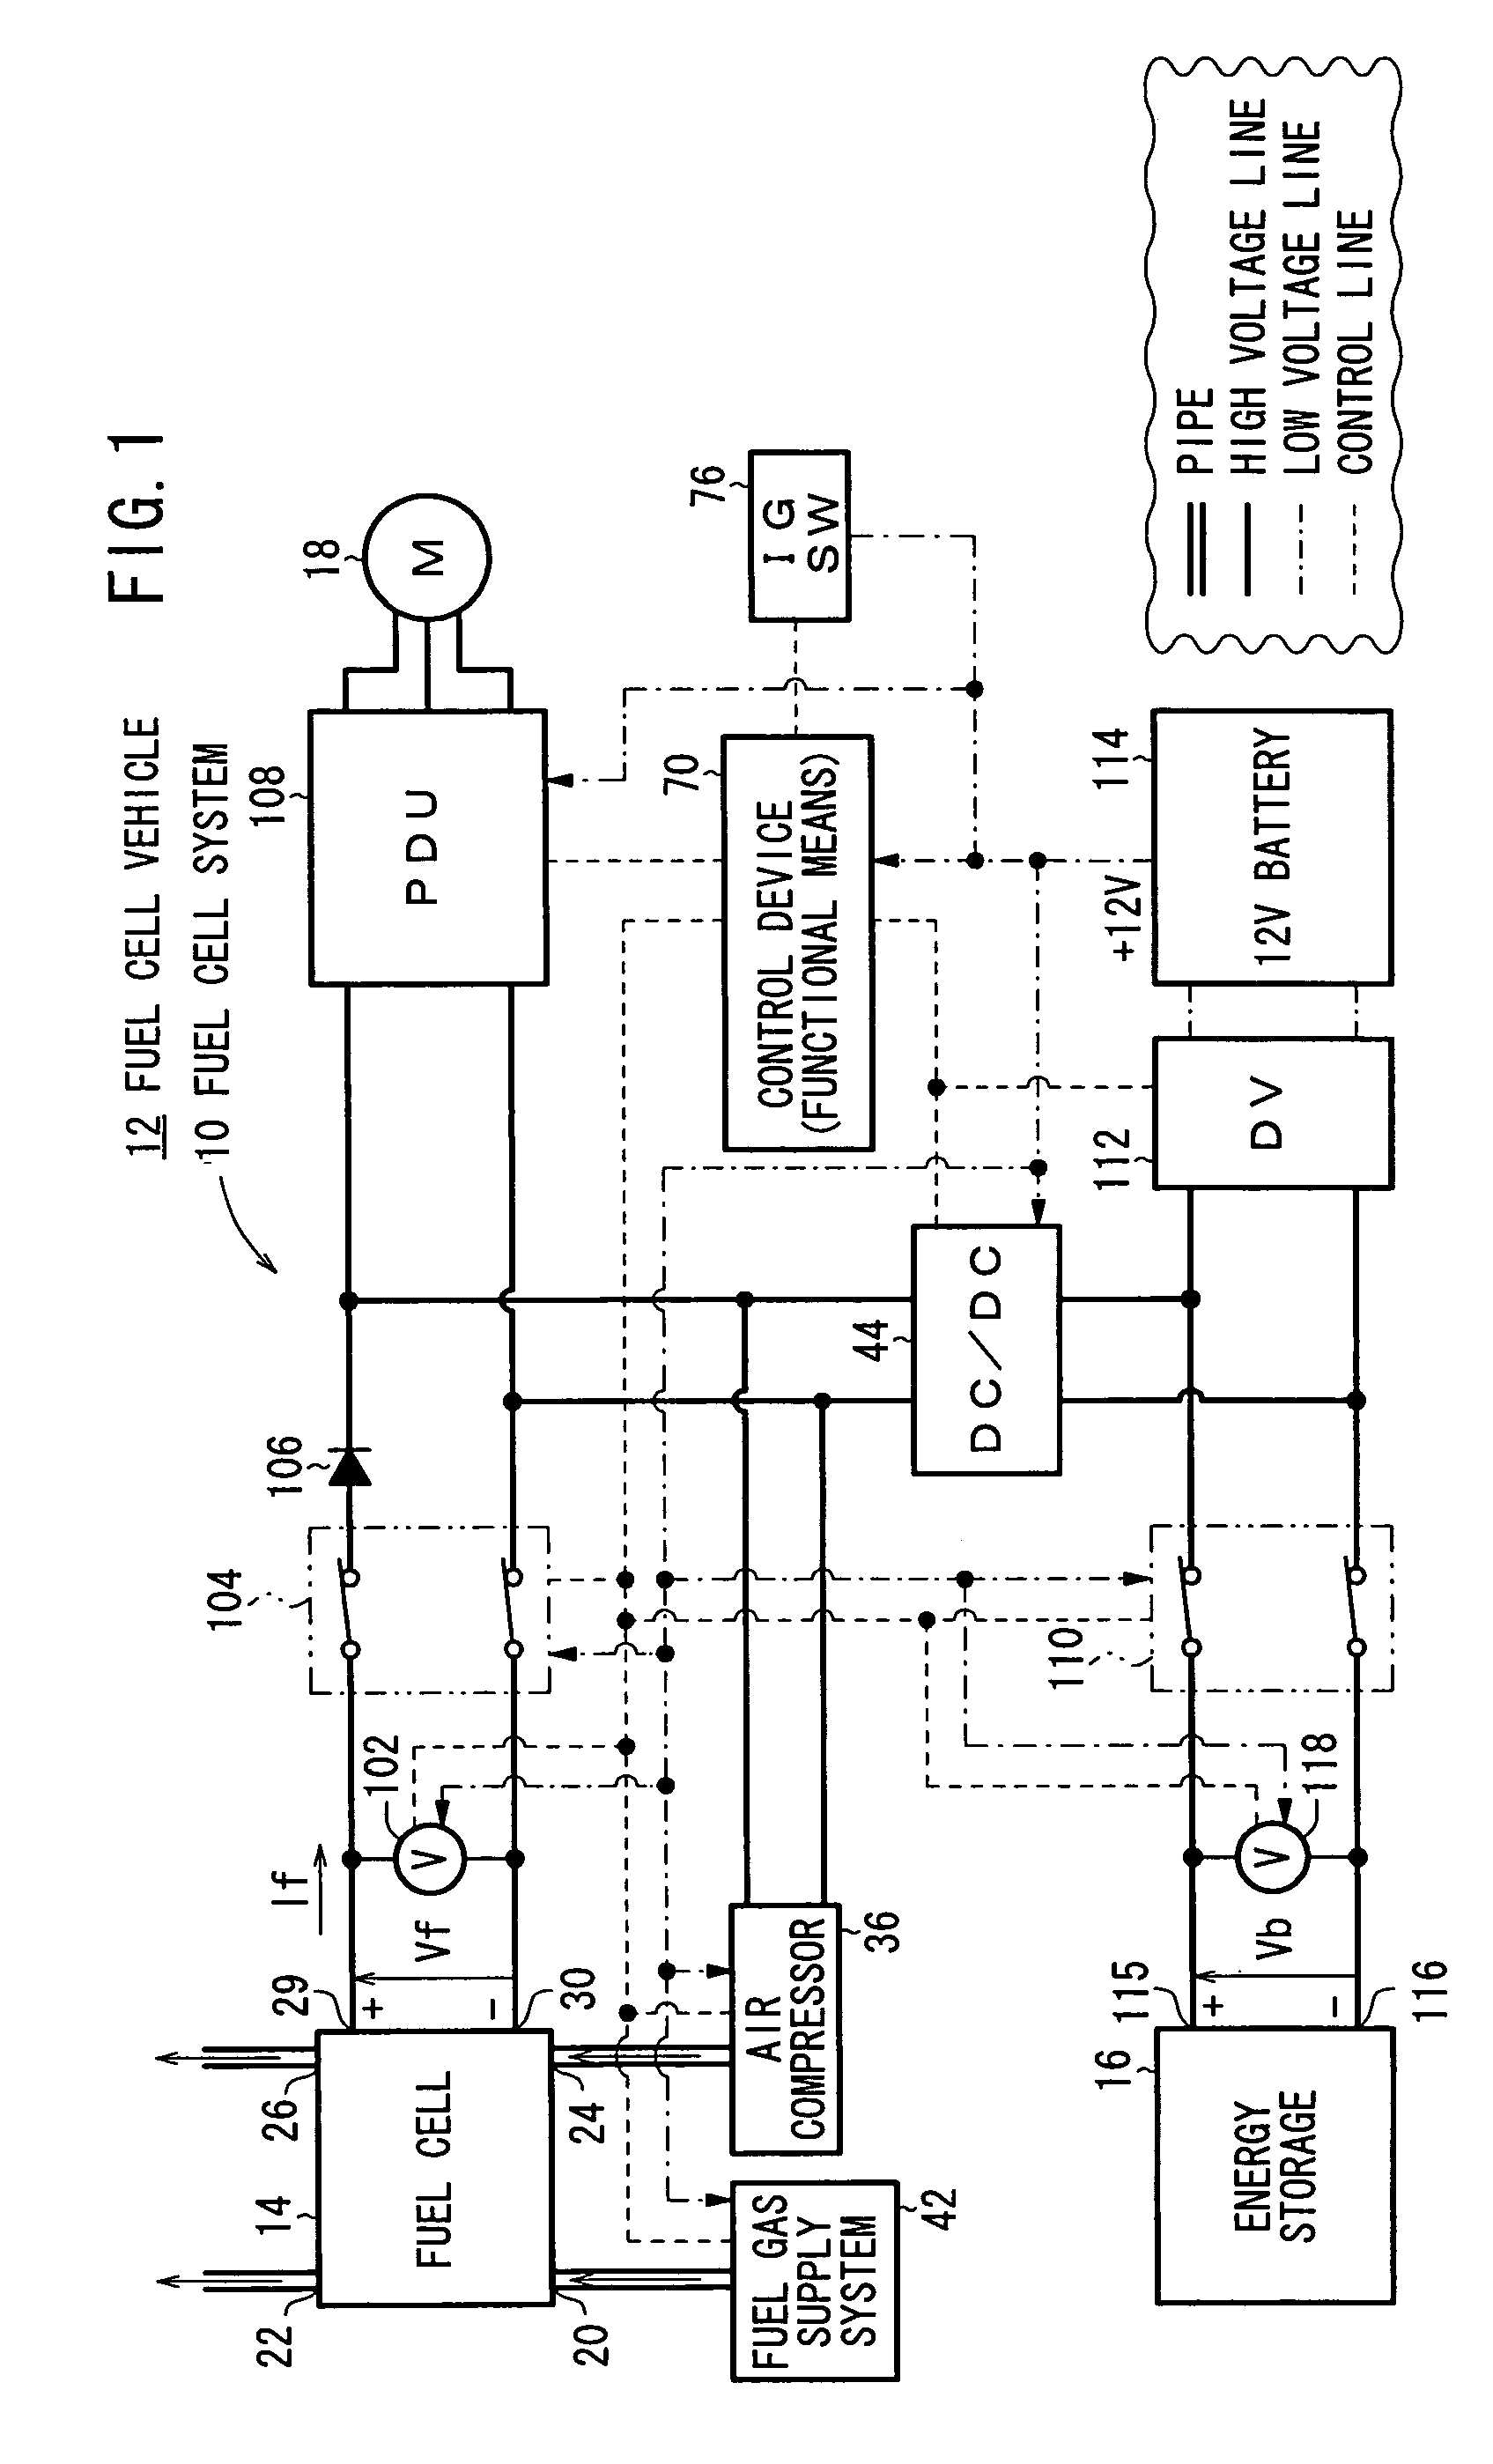 Fuel cell system and method of controlling electrical energy discharged in the fuel cell system